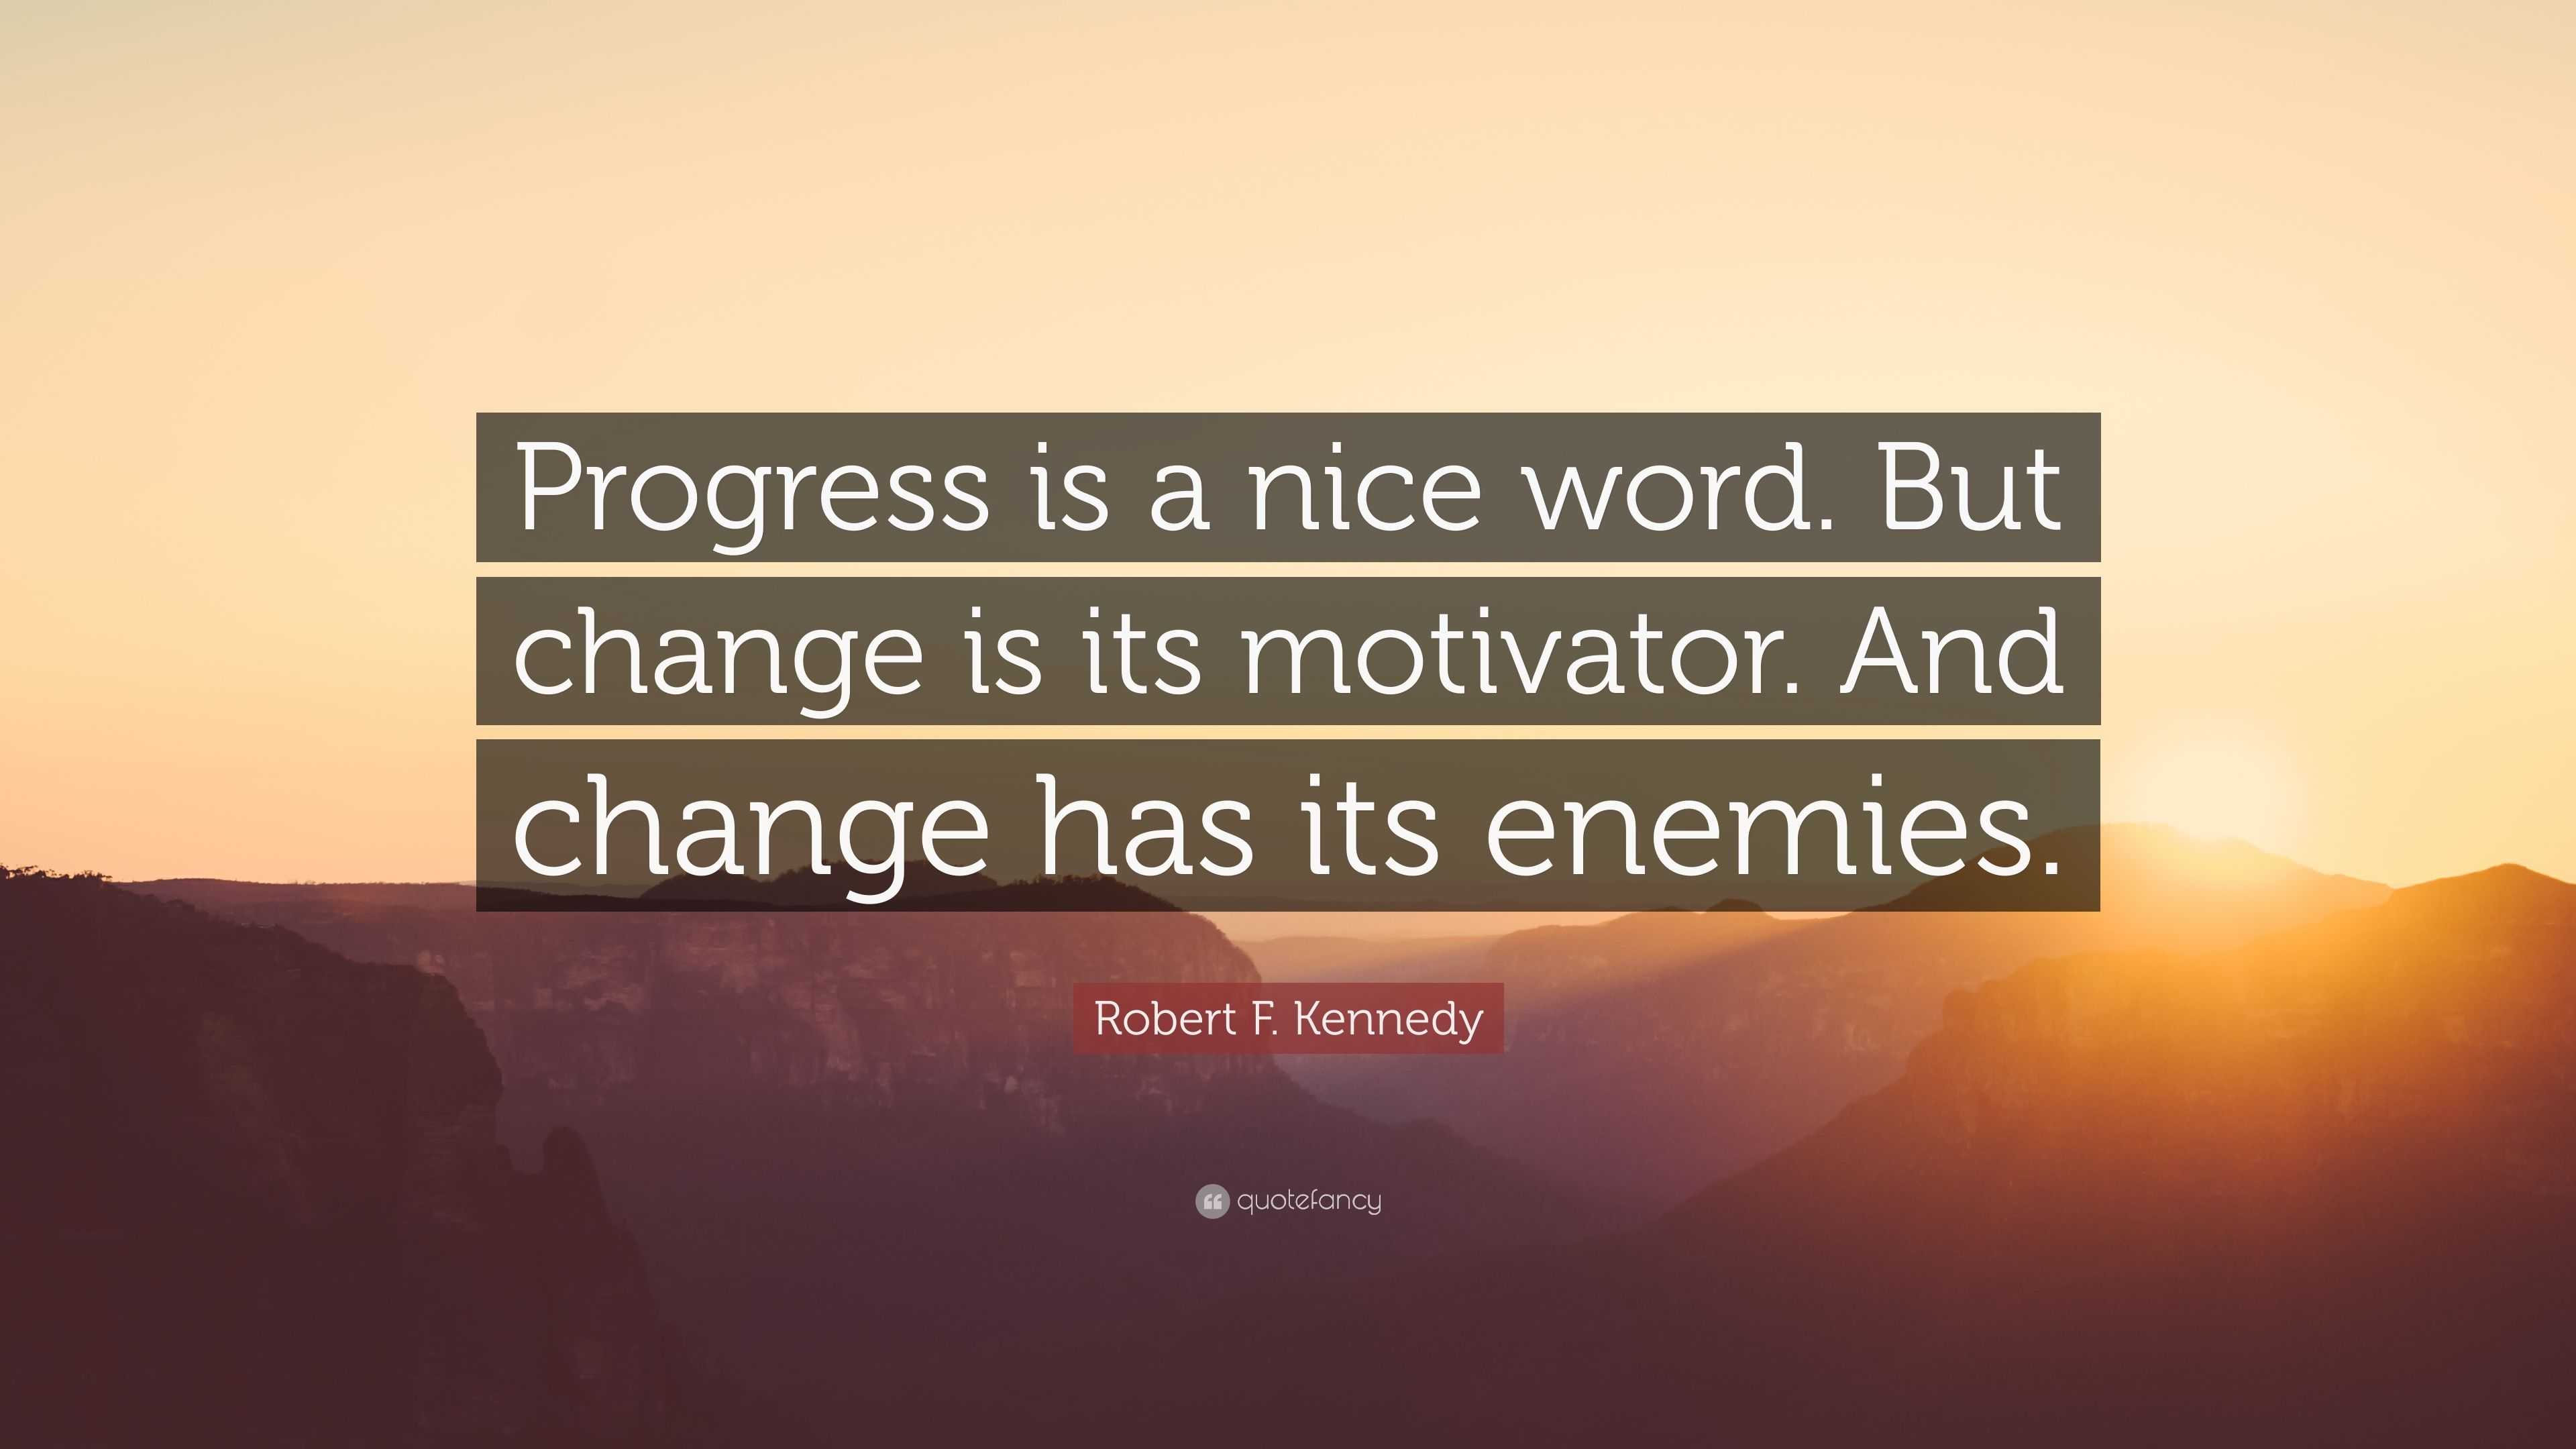 Robert F. Kennedy Quote: “Progress is a nice word. But change is its